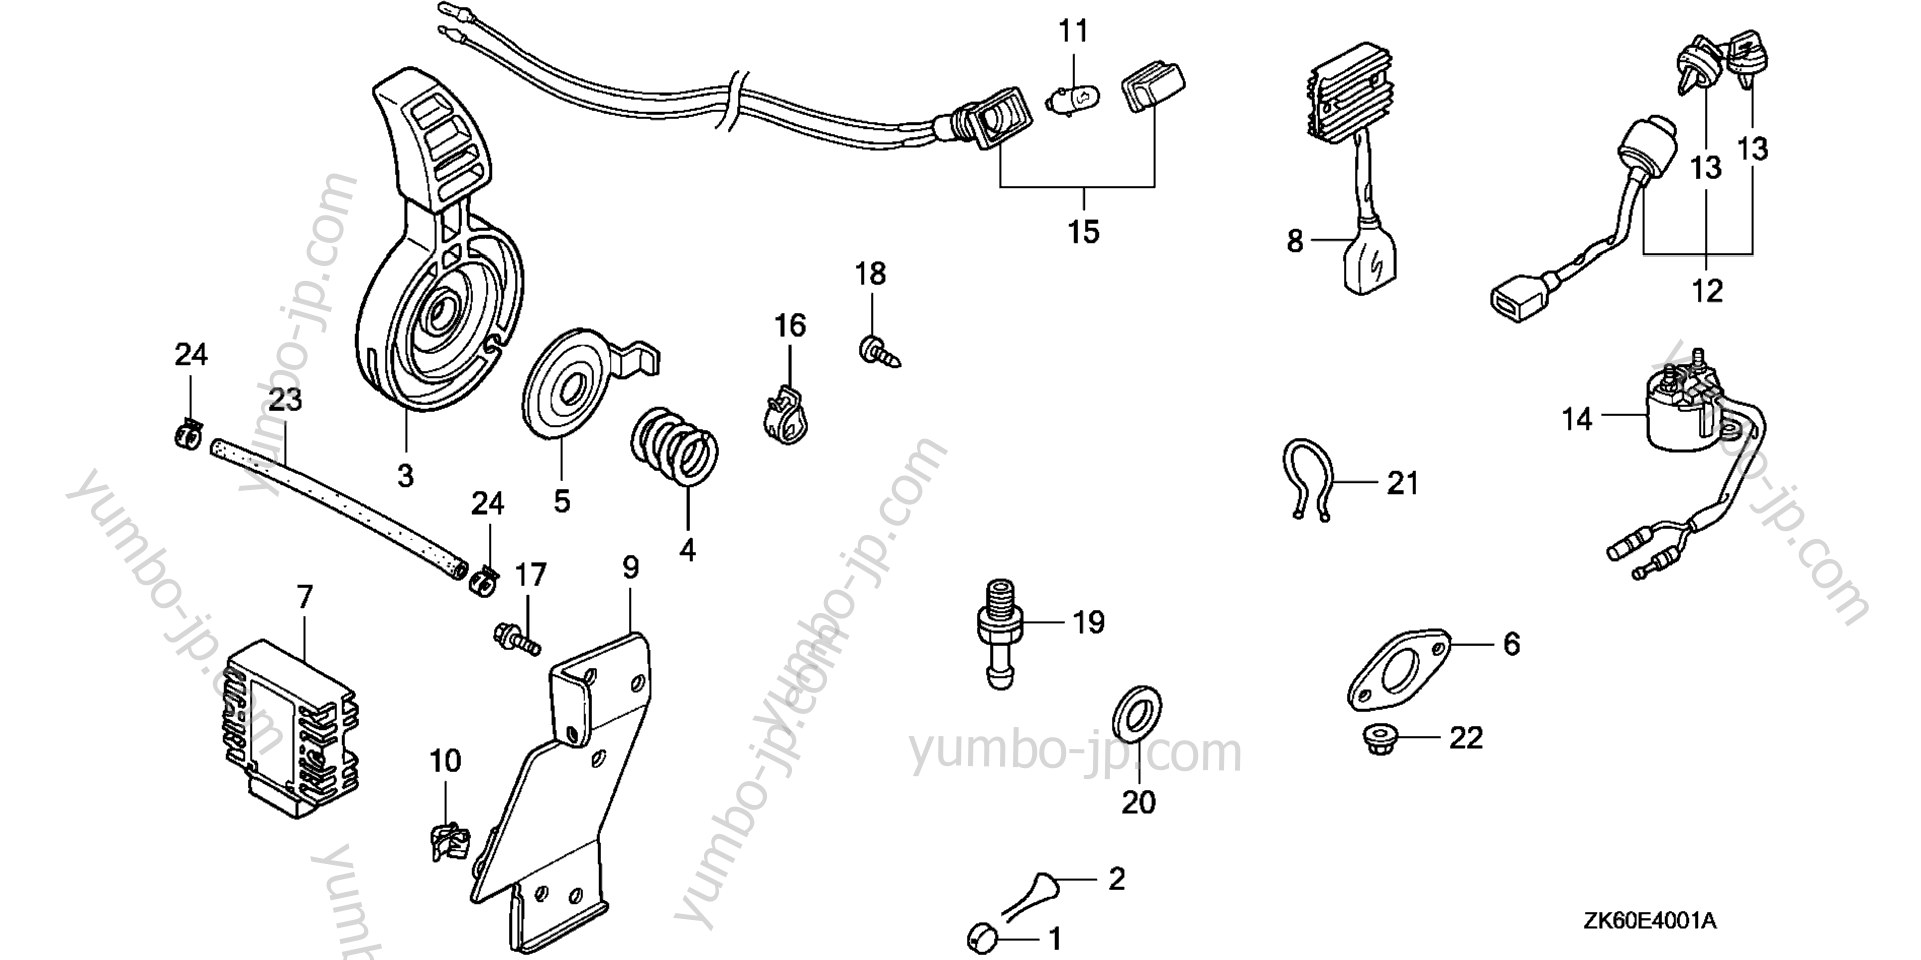 OTHER PARTS (THROTTLE LEVER) for multi purpose engines HONDA GX390K1 VPX5 